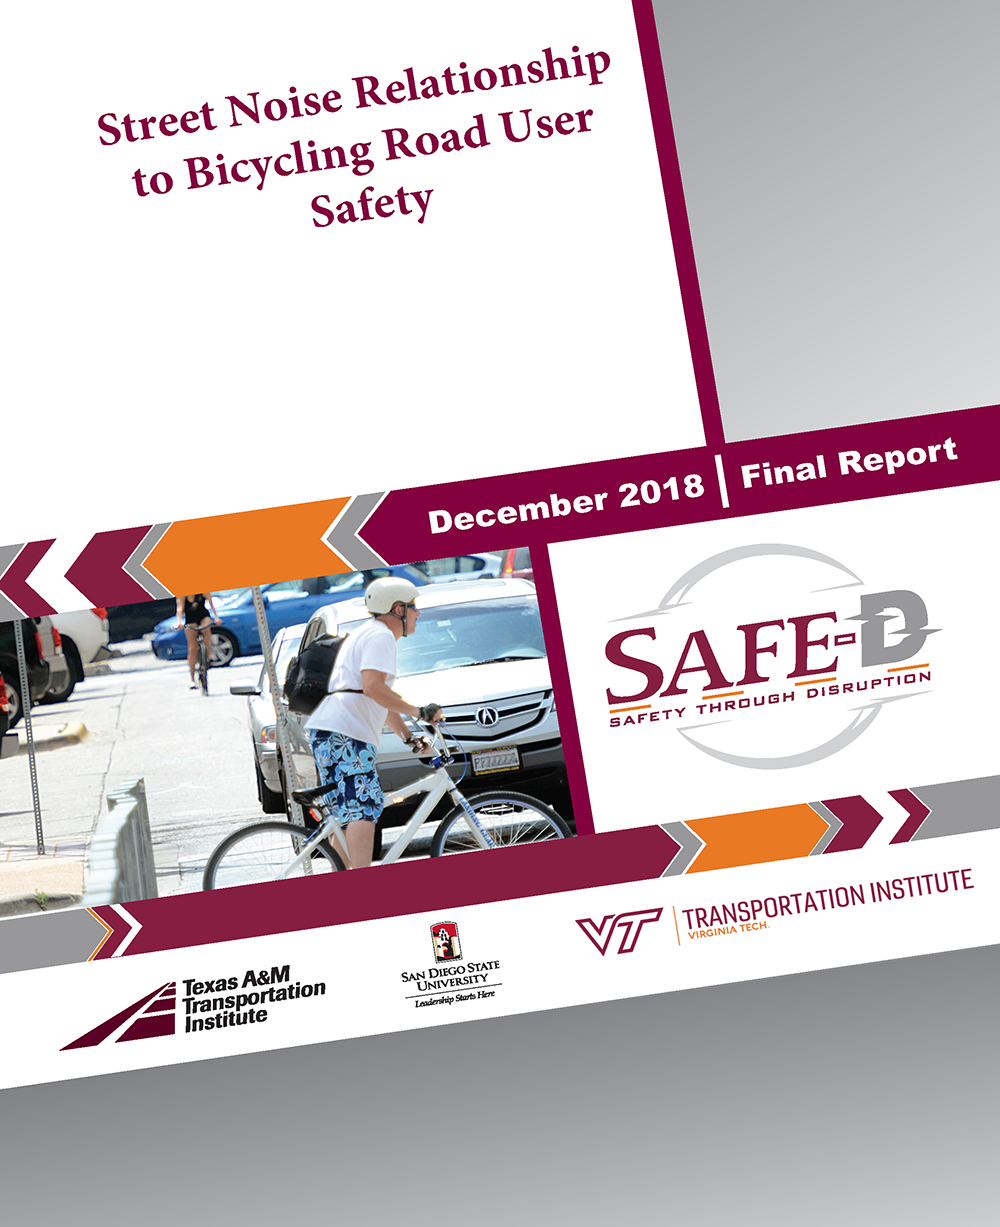 02-027 Final Research Report: Street Noise Relationship to Bicycling Road User Safety